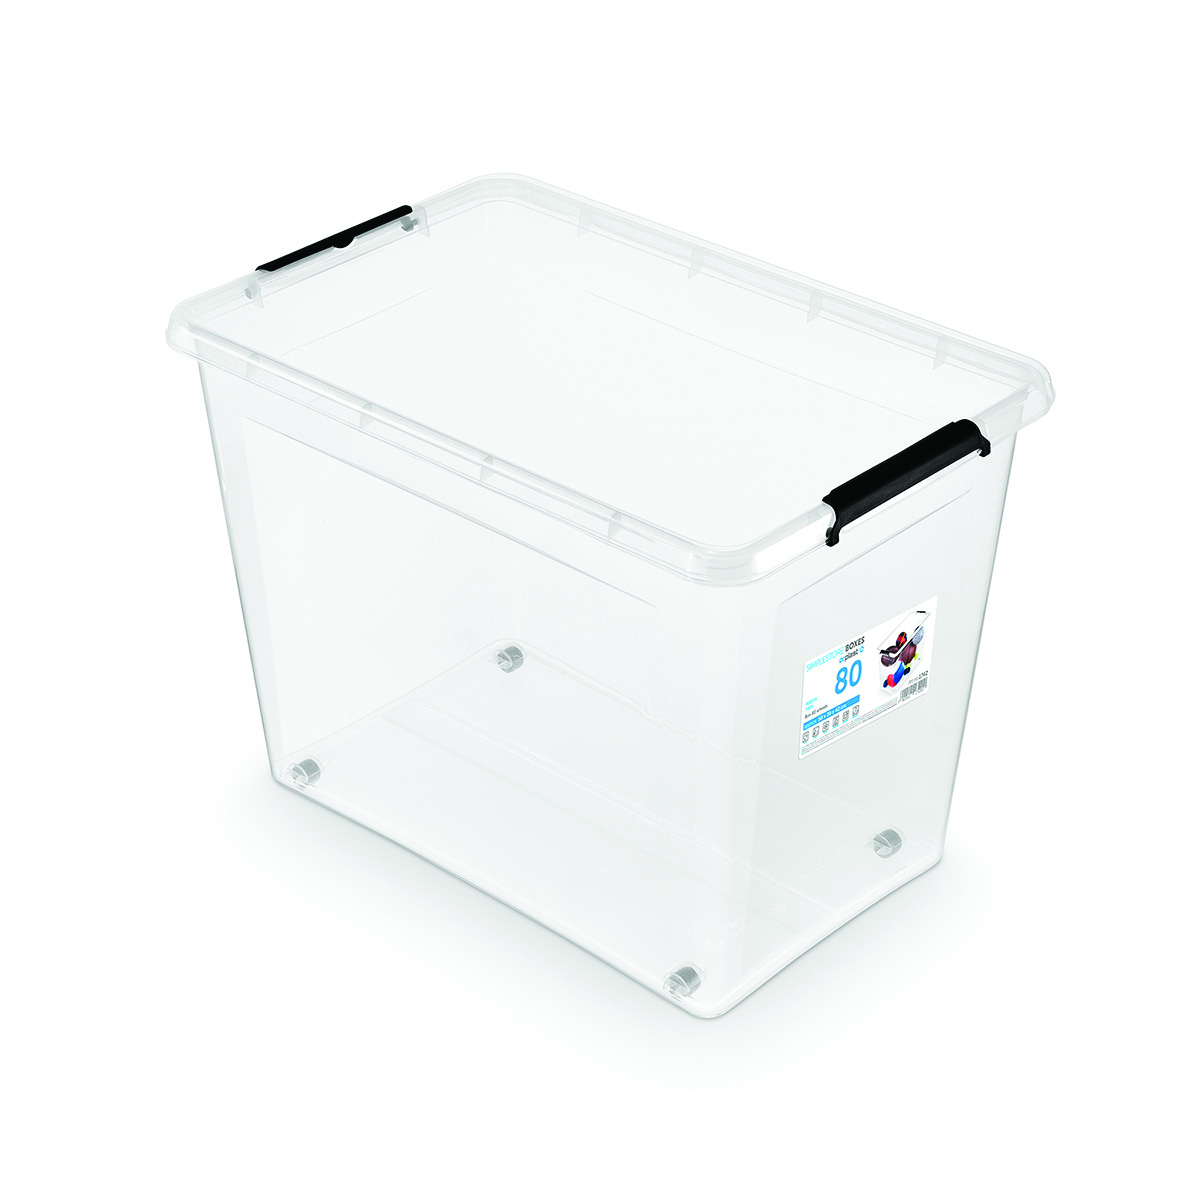 Fall Barber shop pain ORPLAST storage container, SimpleStore Box, 80 l, with a clip, on wheels,  transparent - Eko biuro